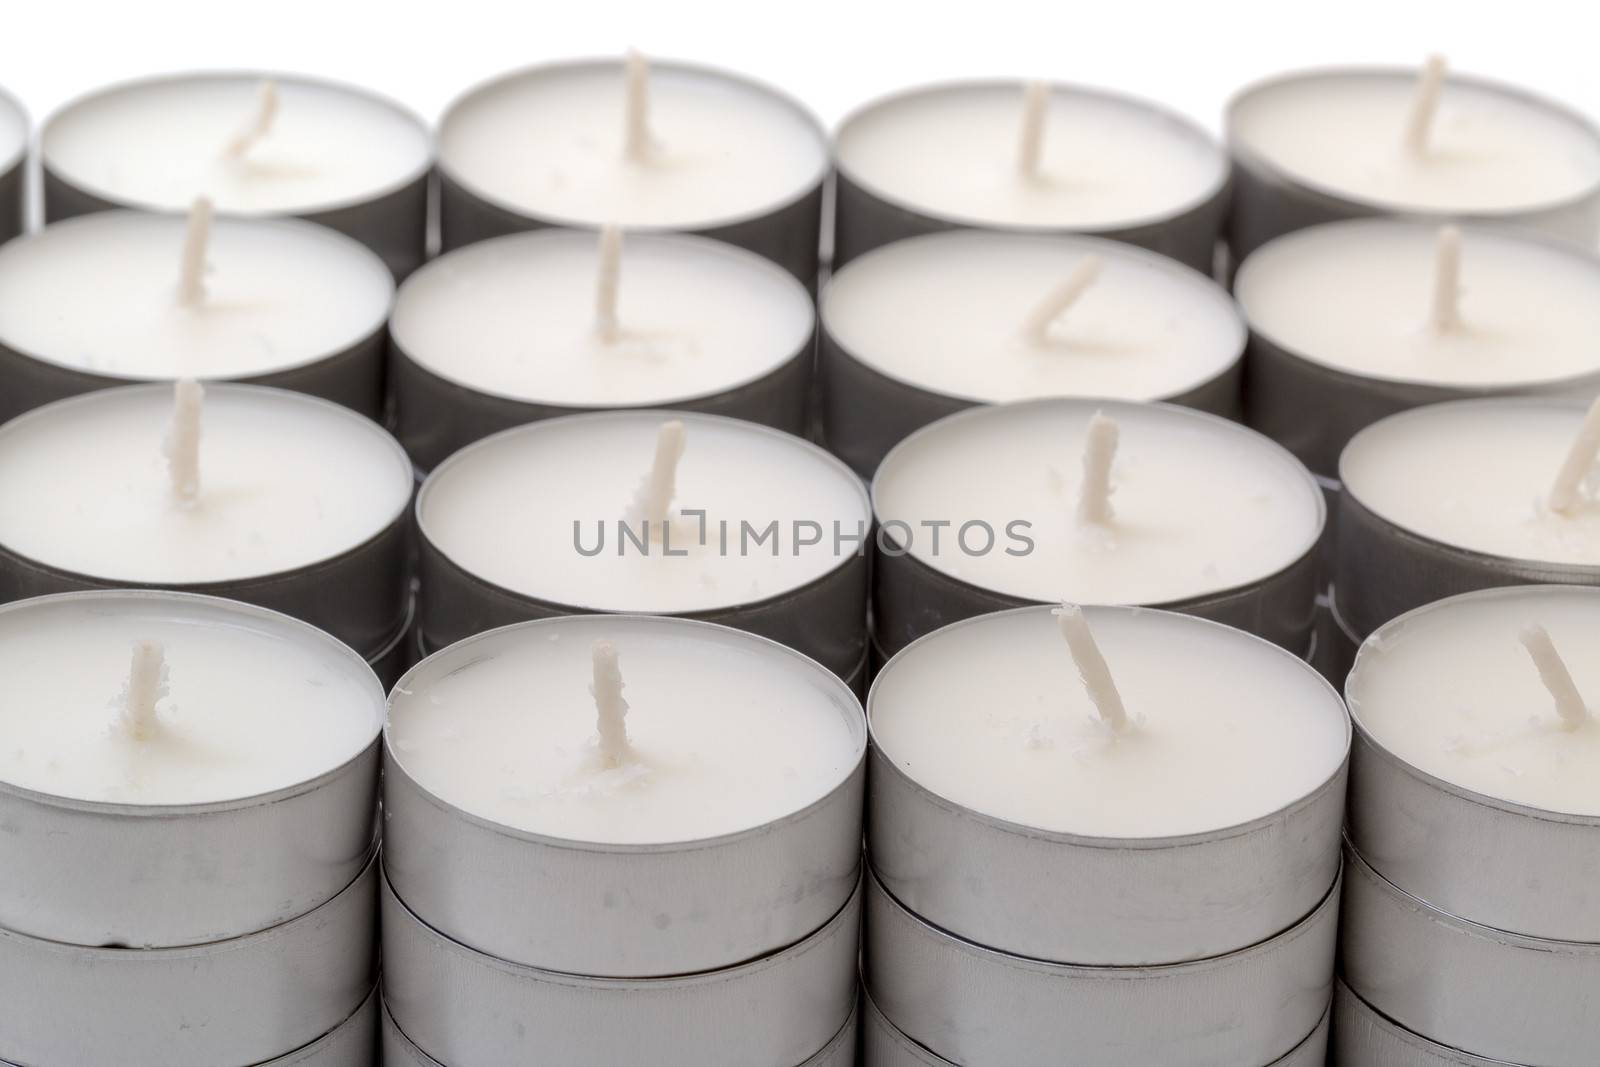 High angle view of rows of white wax tea light candles